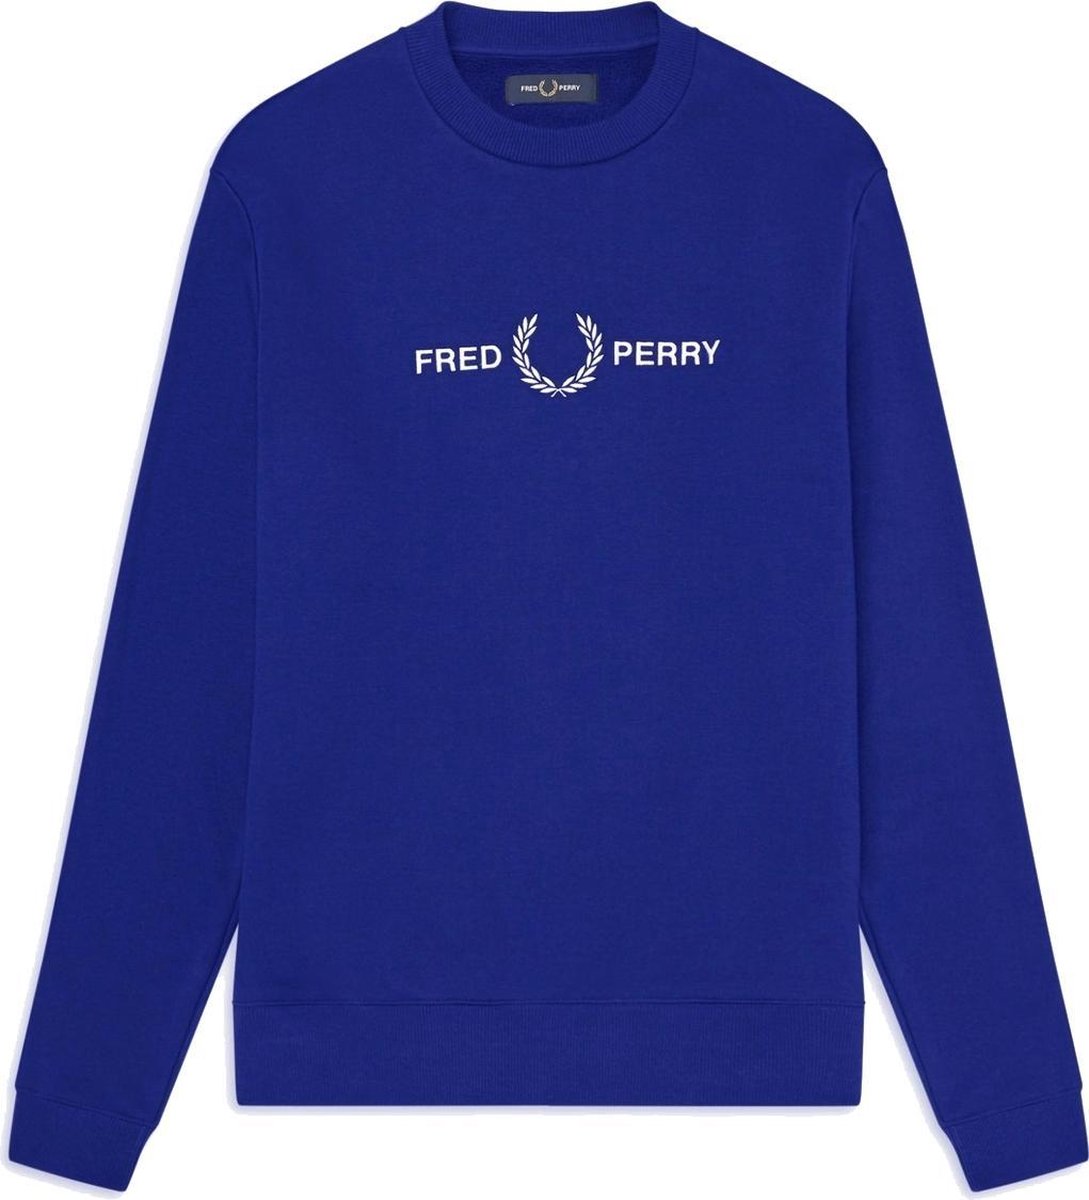 Fred Perry - Graphic Sweatshirt - Sweater - L - Blauw